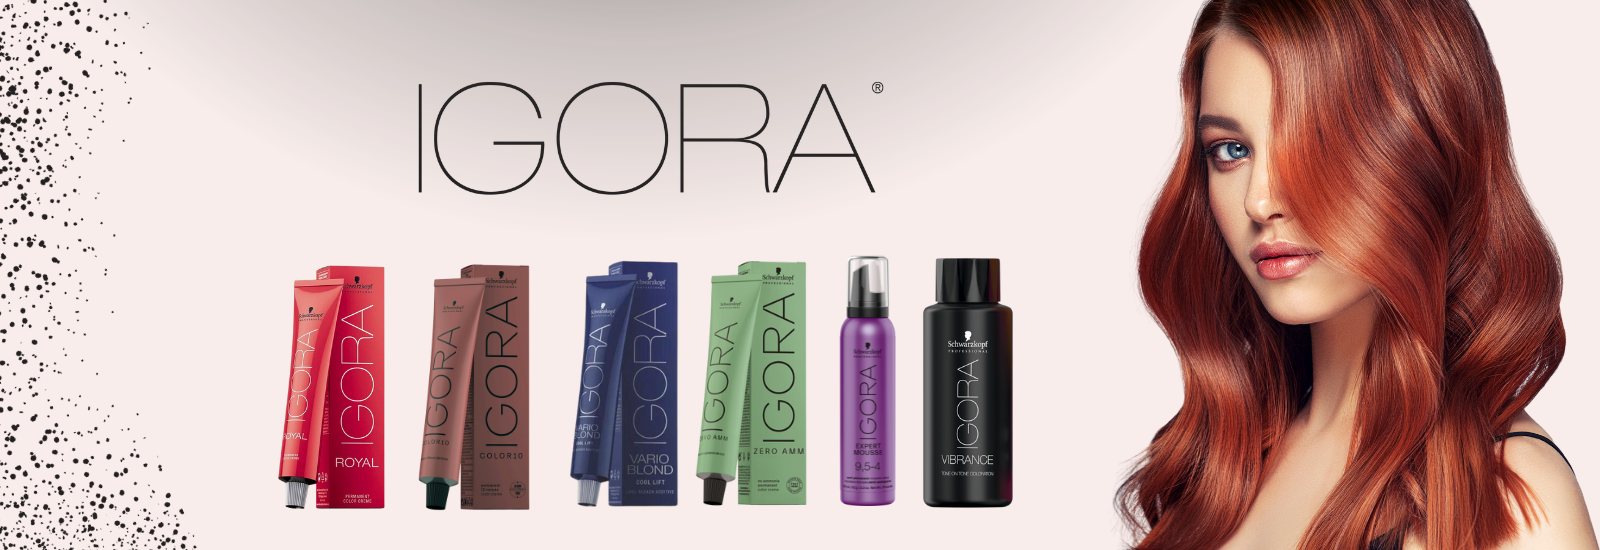 Schwarzkopf professional hair care products cover image